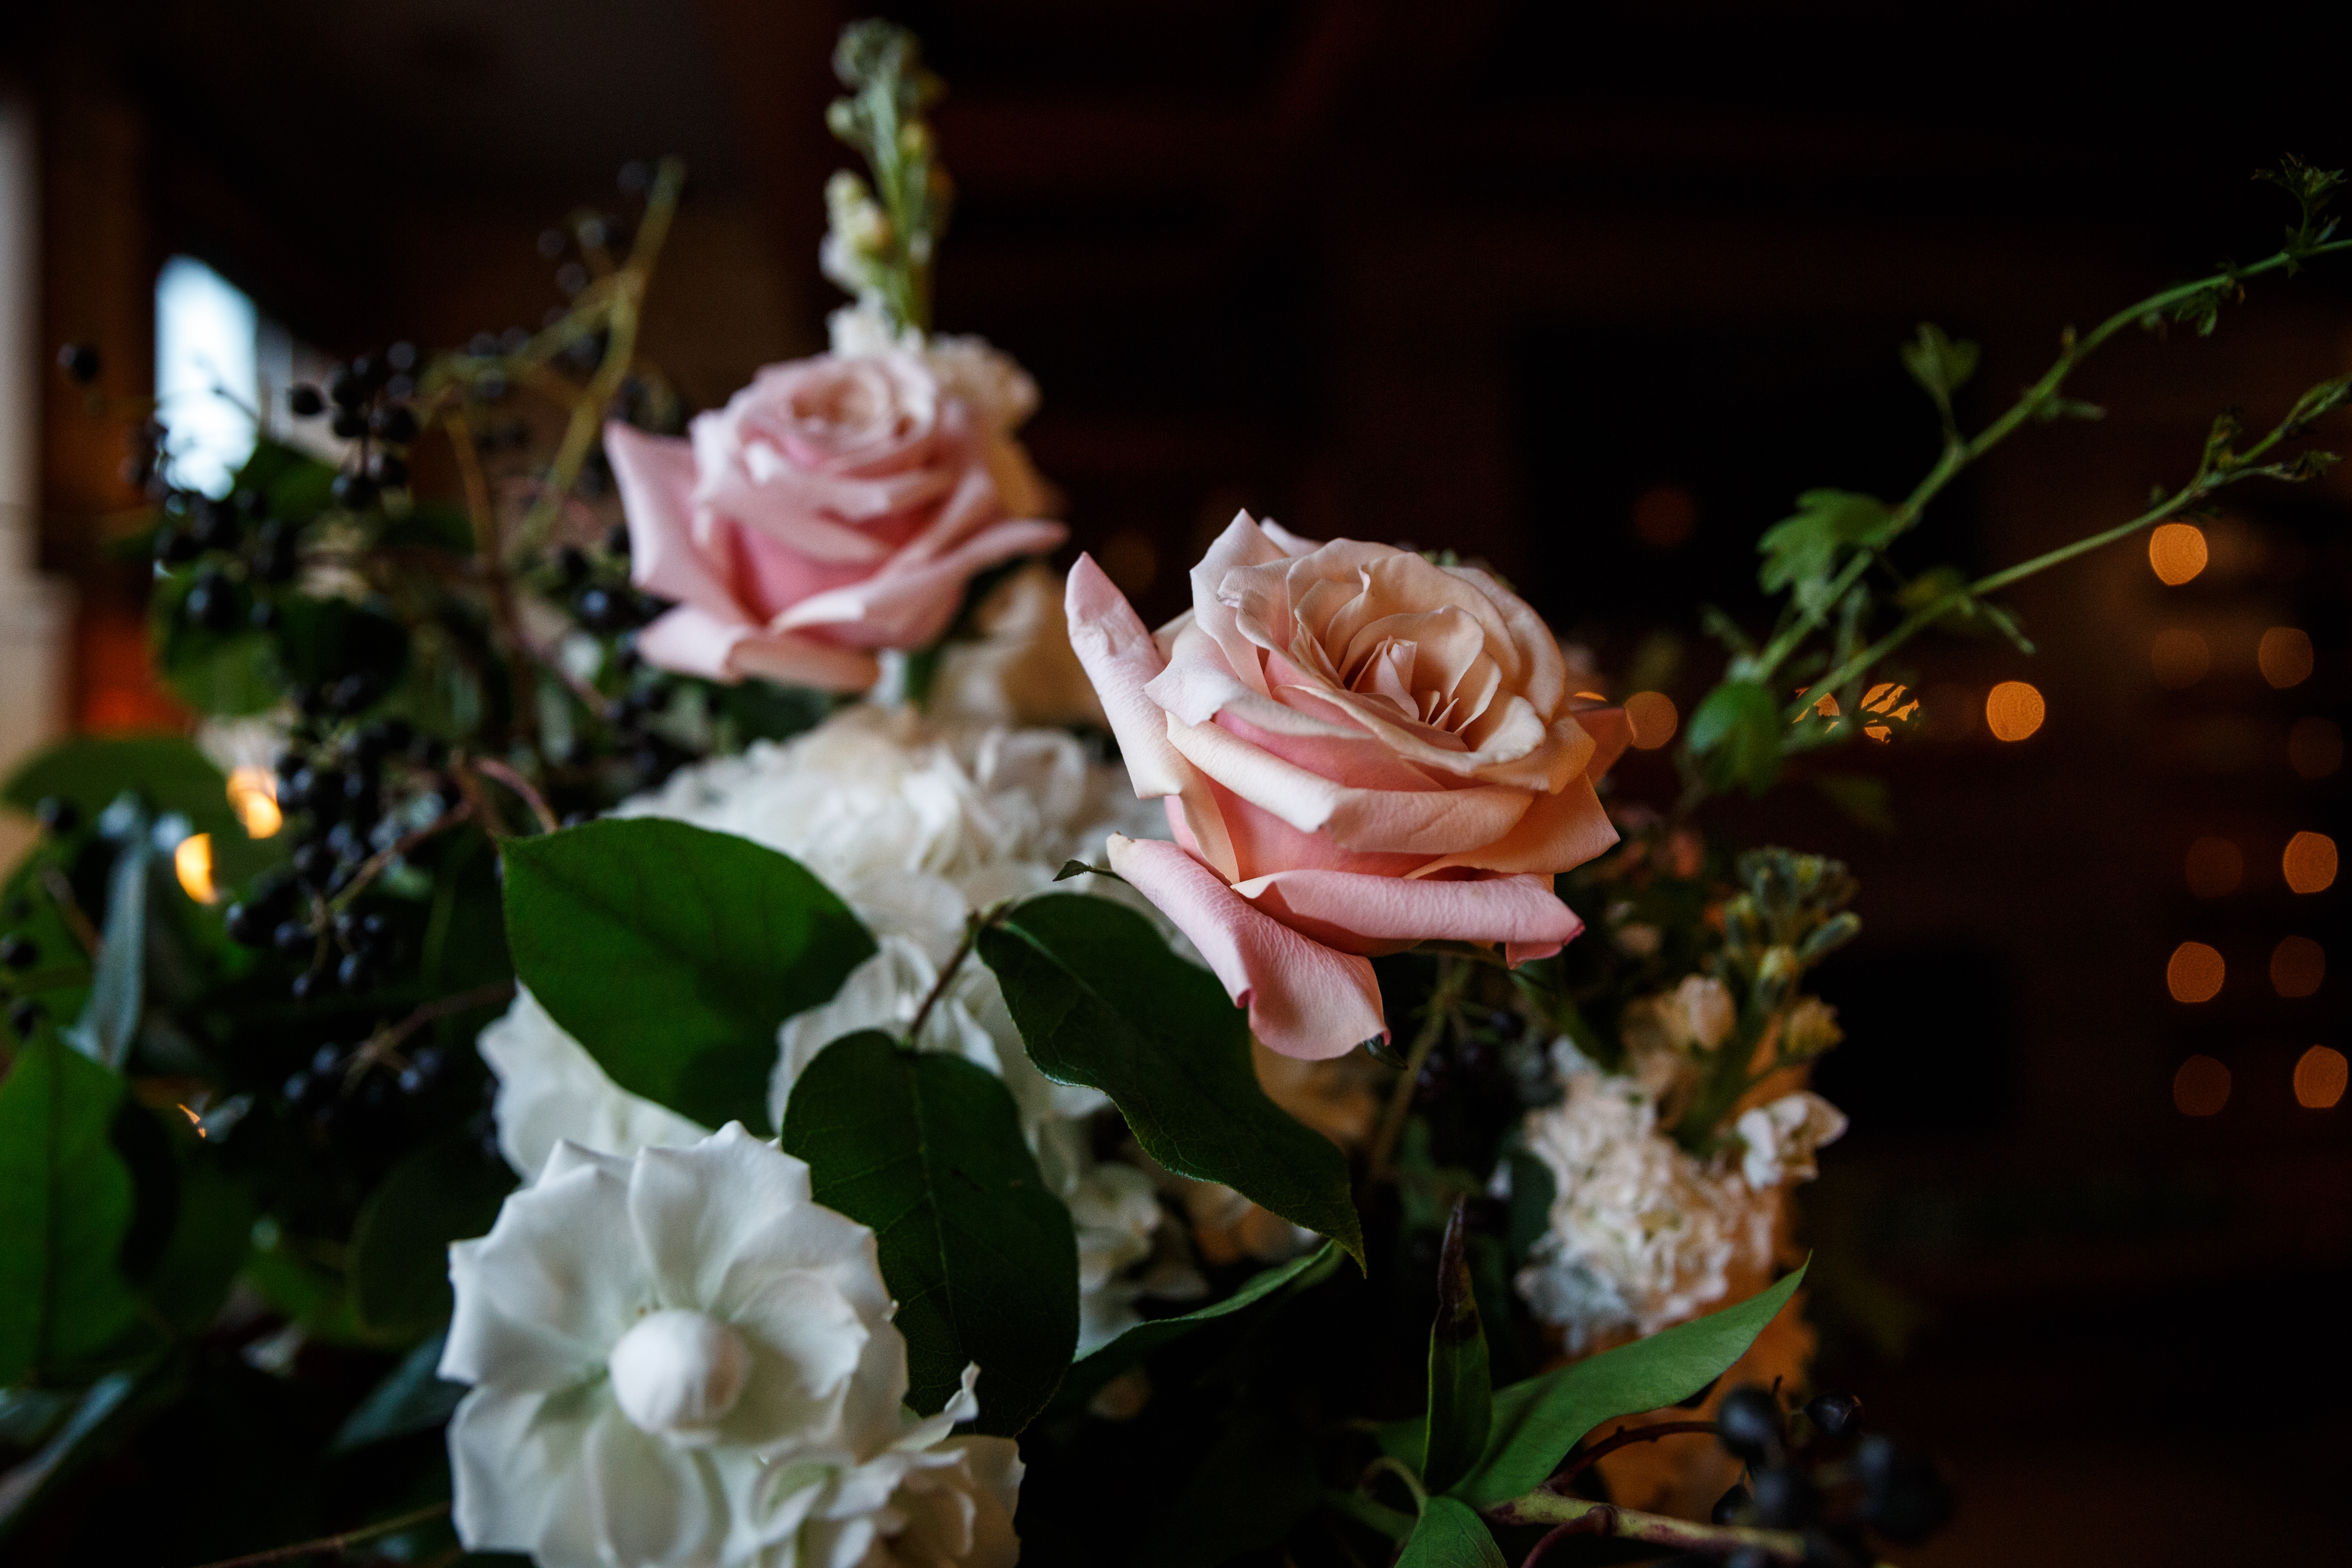 Pink garden roses at March wedding ceremony. Both arrangements were in clear glasses vases on Revolution Brewings wooden barrels as pedestals.